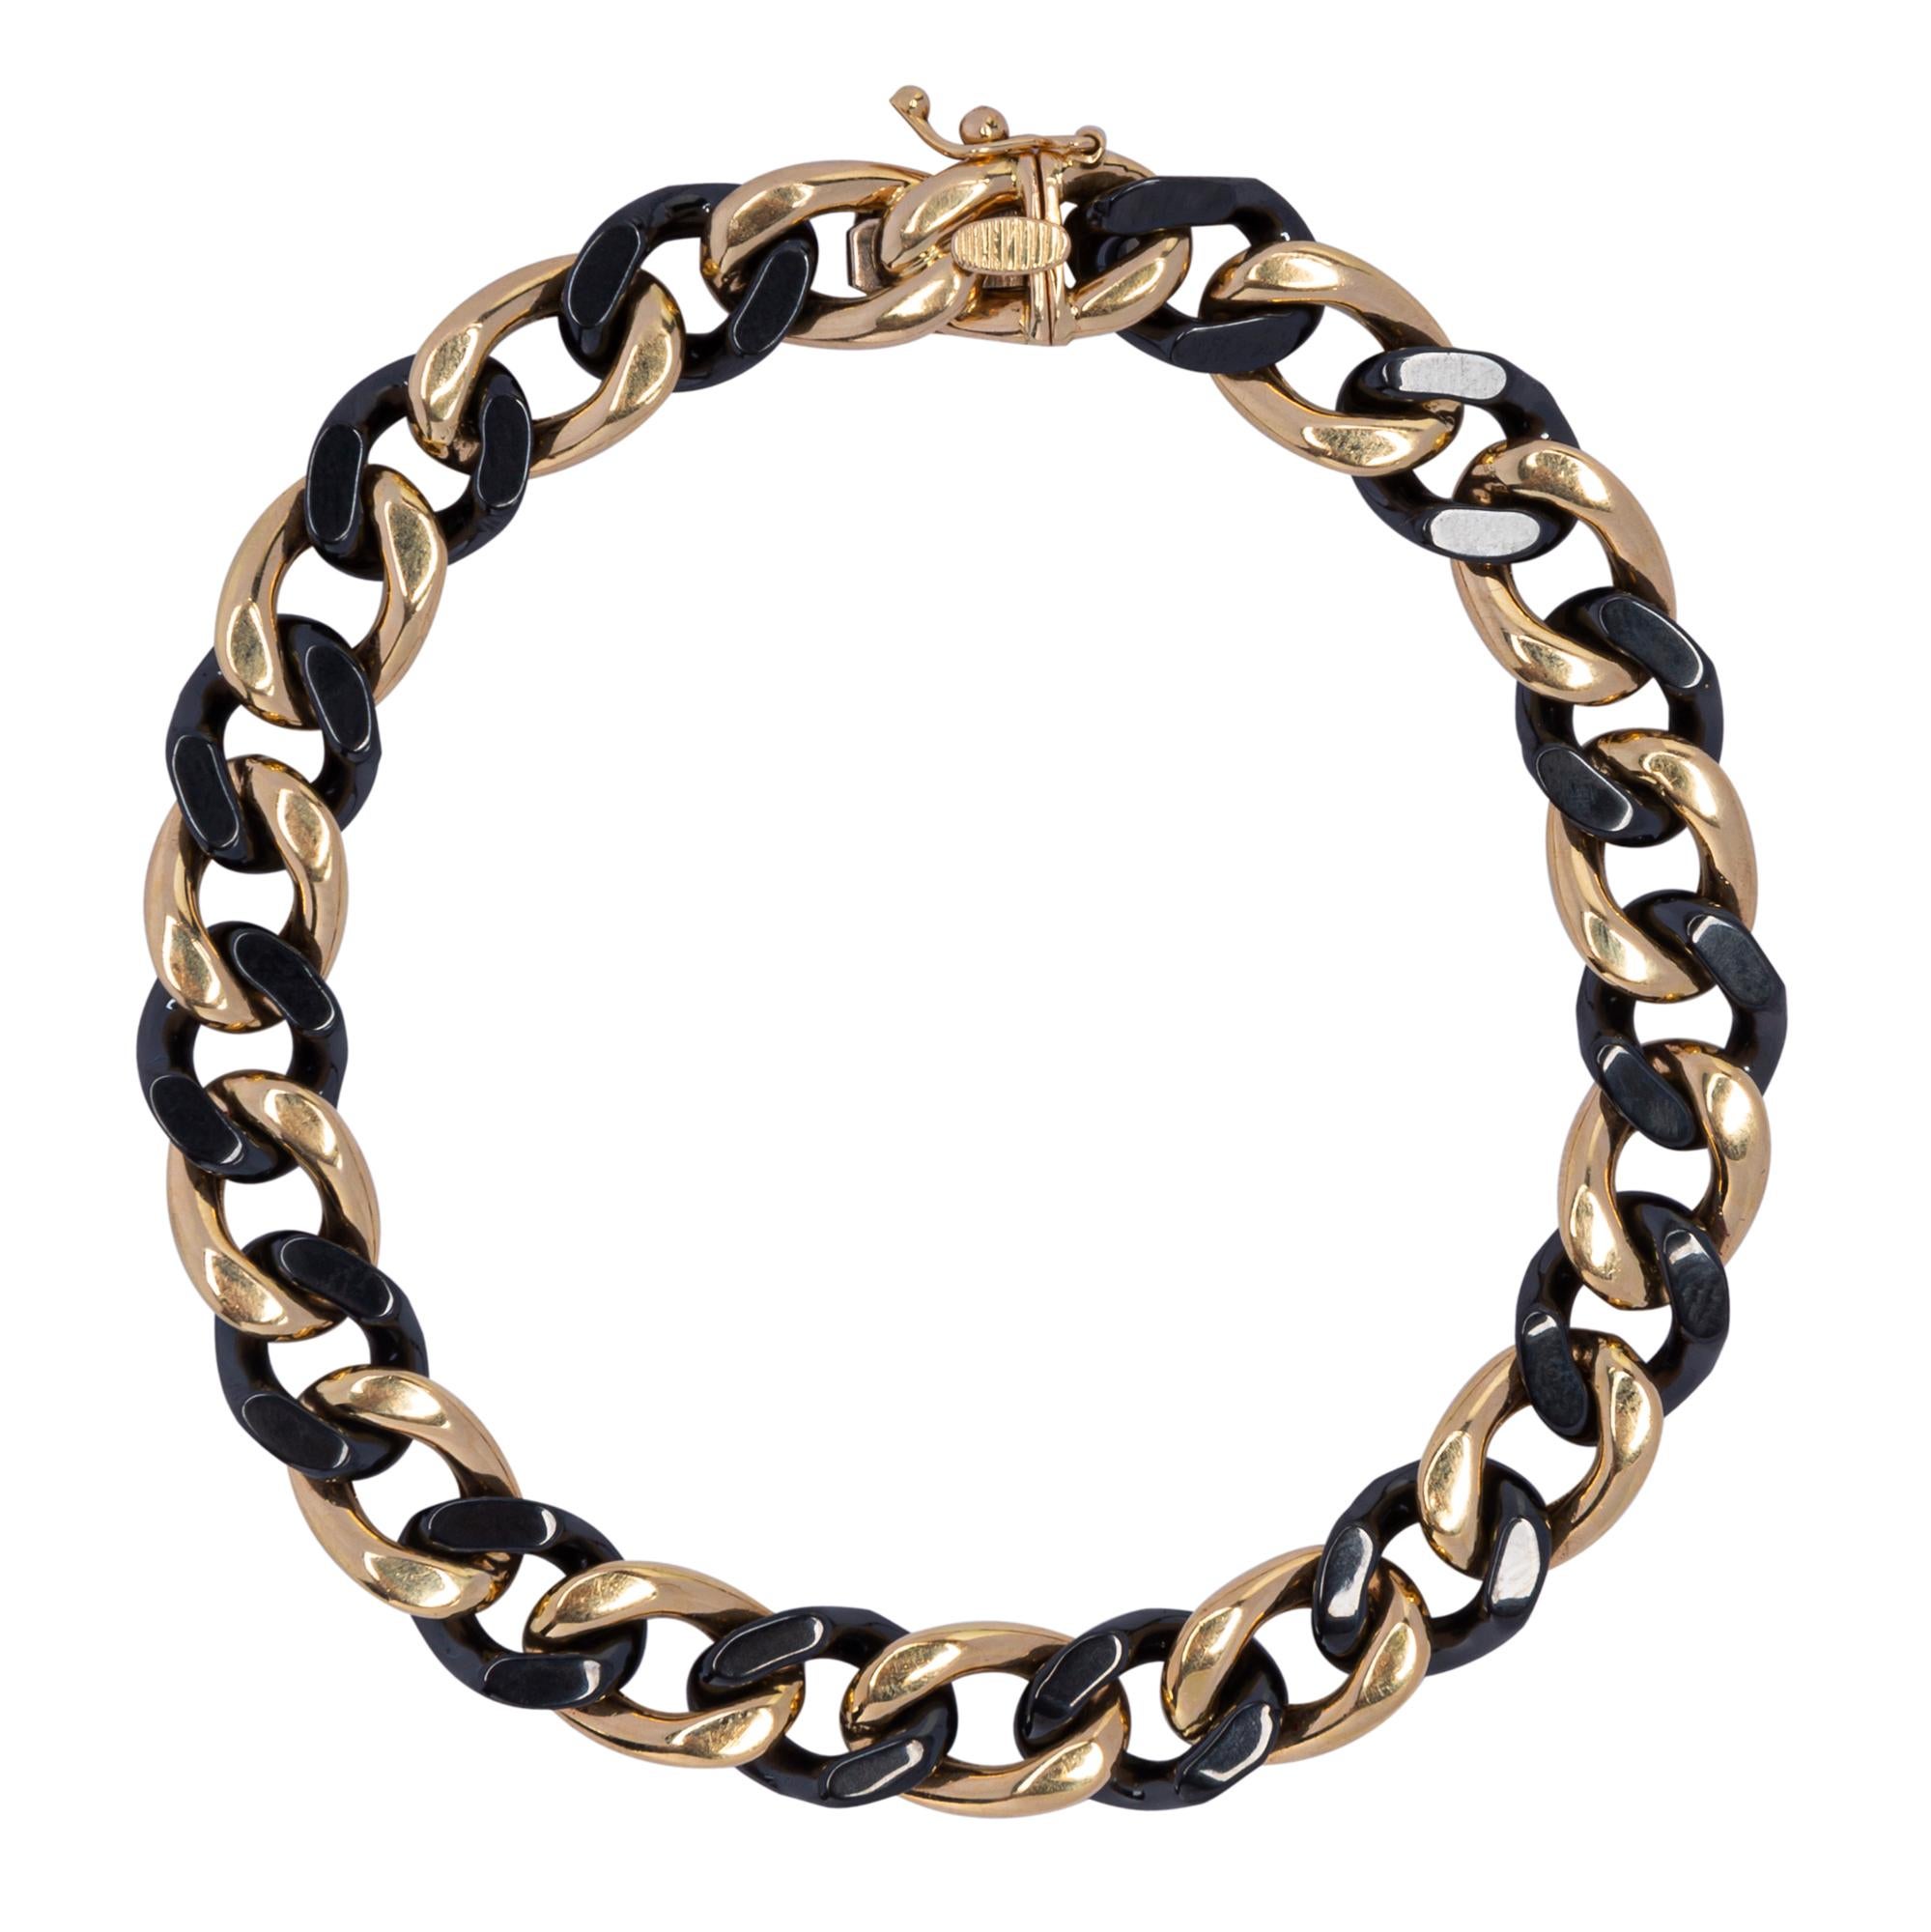 Alex Jona design collection, hand crafted in Italy, alternating 18k yellow gold and black high-tech ceramic curb-link bracelet.
Dimensions :  H x 3 cm, W x 0.8 cm, L x 19.5 cm - H x 1.18 in, W x 0.31 in, L x 7.67 in.
With a hardness approaching that